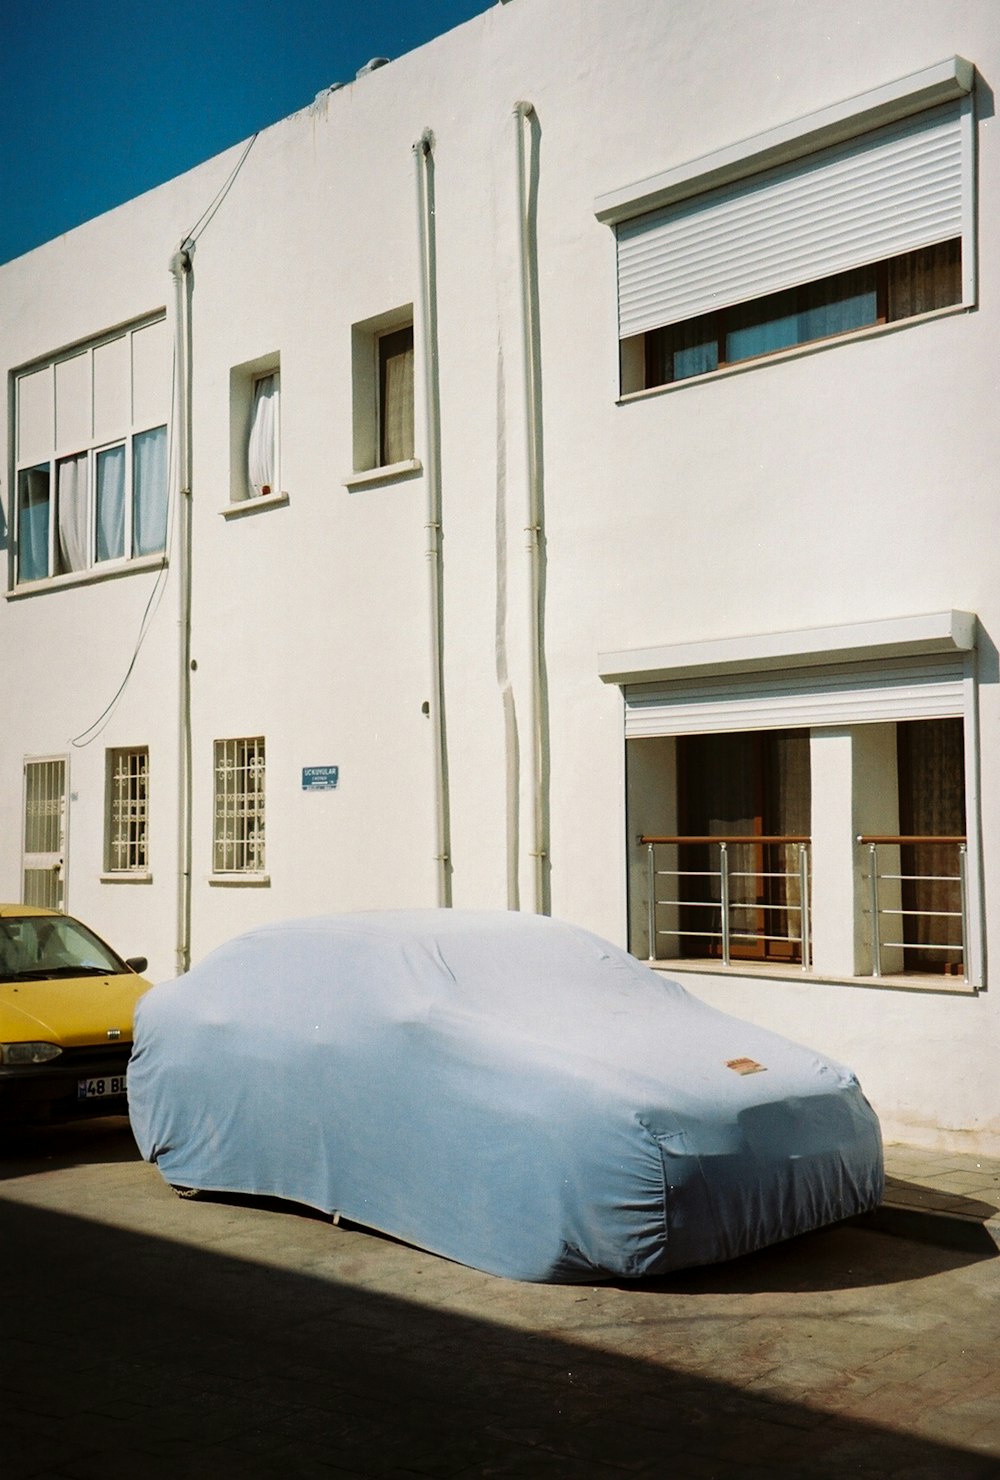 yellow car parked beside white concrete building during daytime